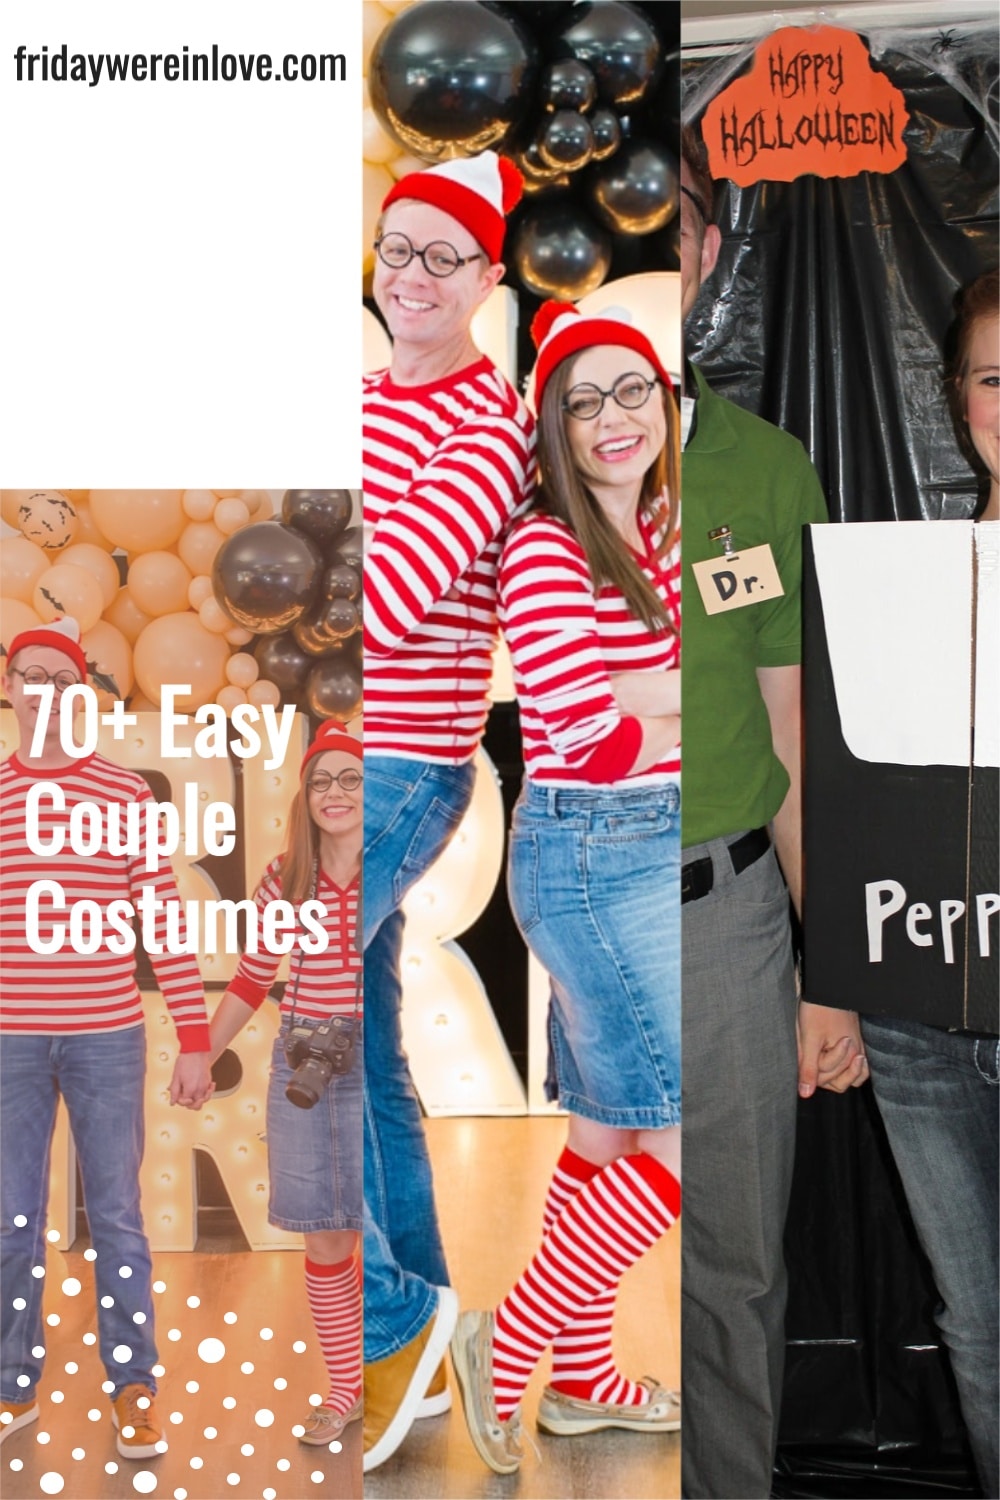 80+ Easy Couple Costumes /Last Minute Costumes - Friday We're In Love